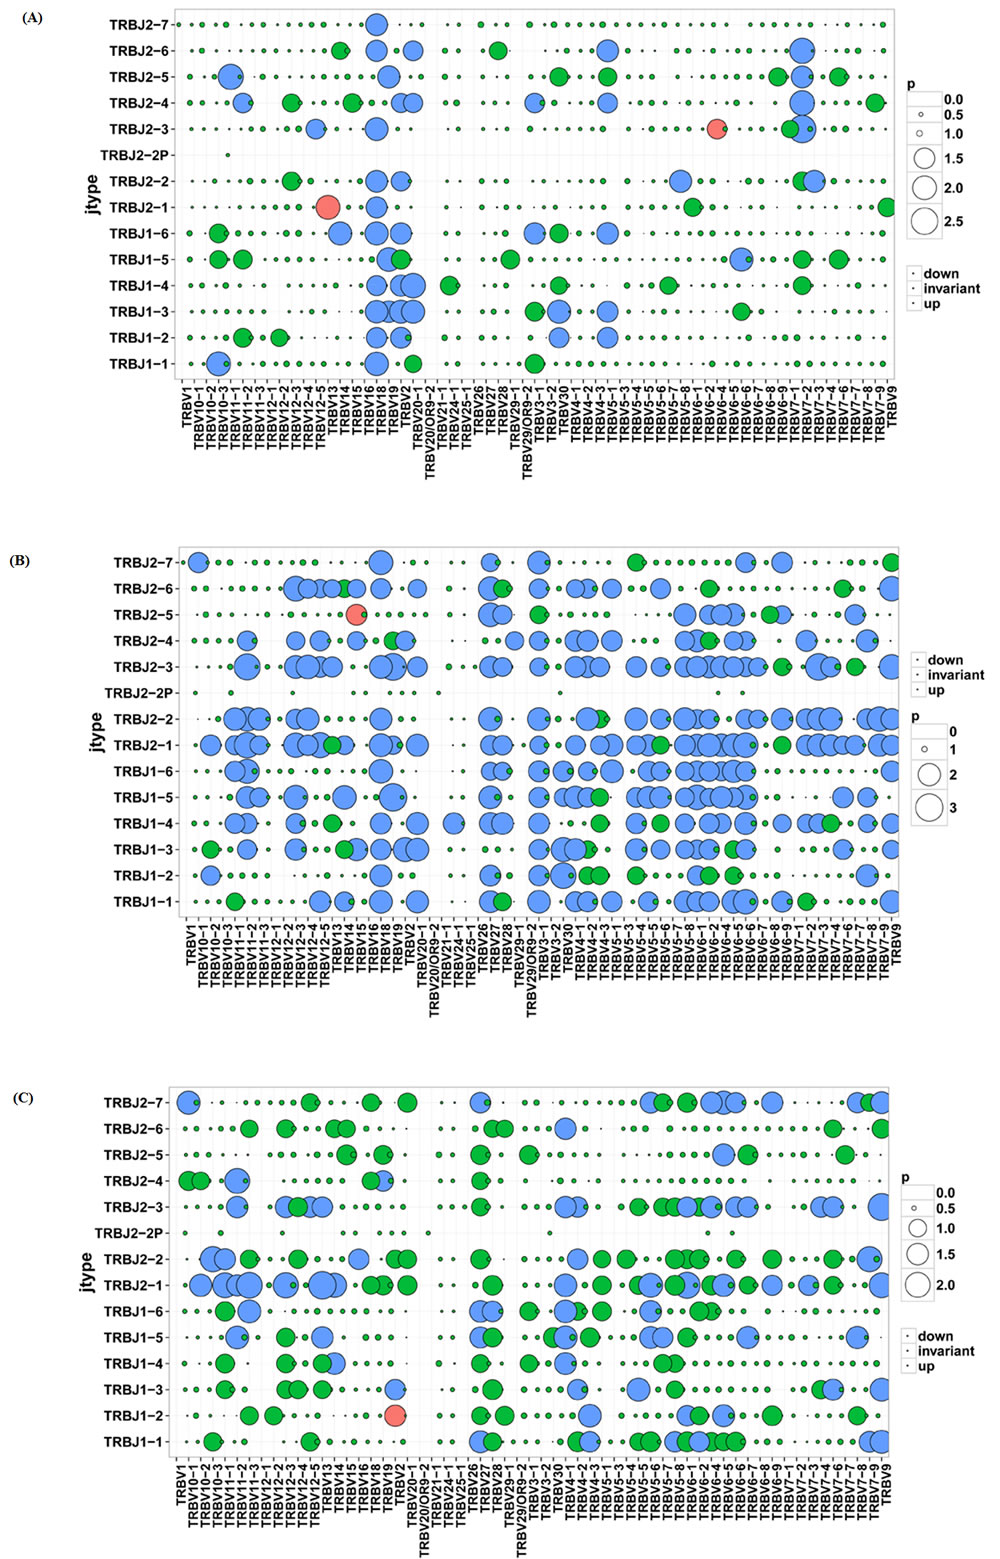 Comparison of V-J combinations among CD4+, CD8+ and tissue groups.